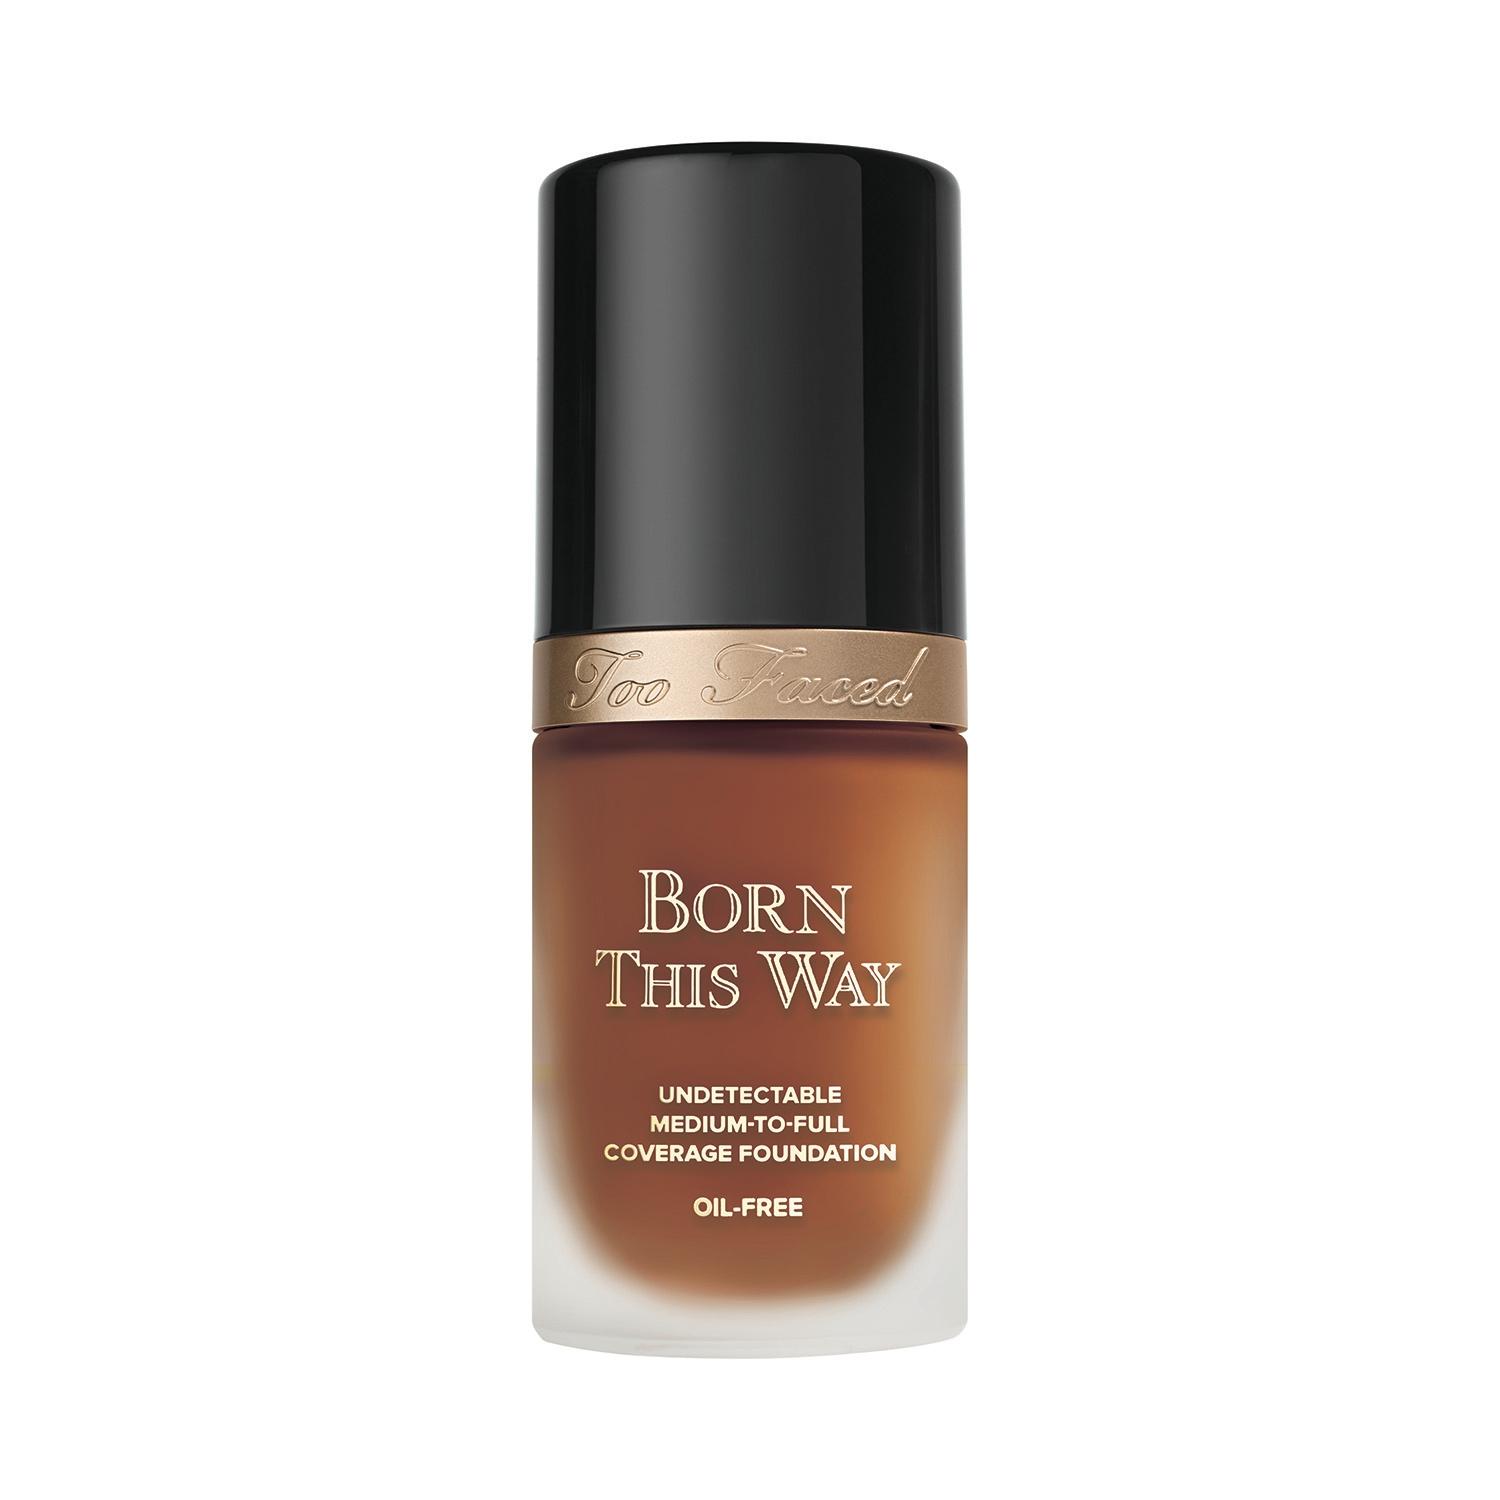 too faced born this way matte foundation - spiced rum (30ml)